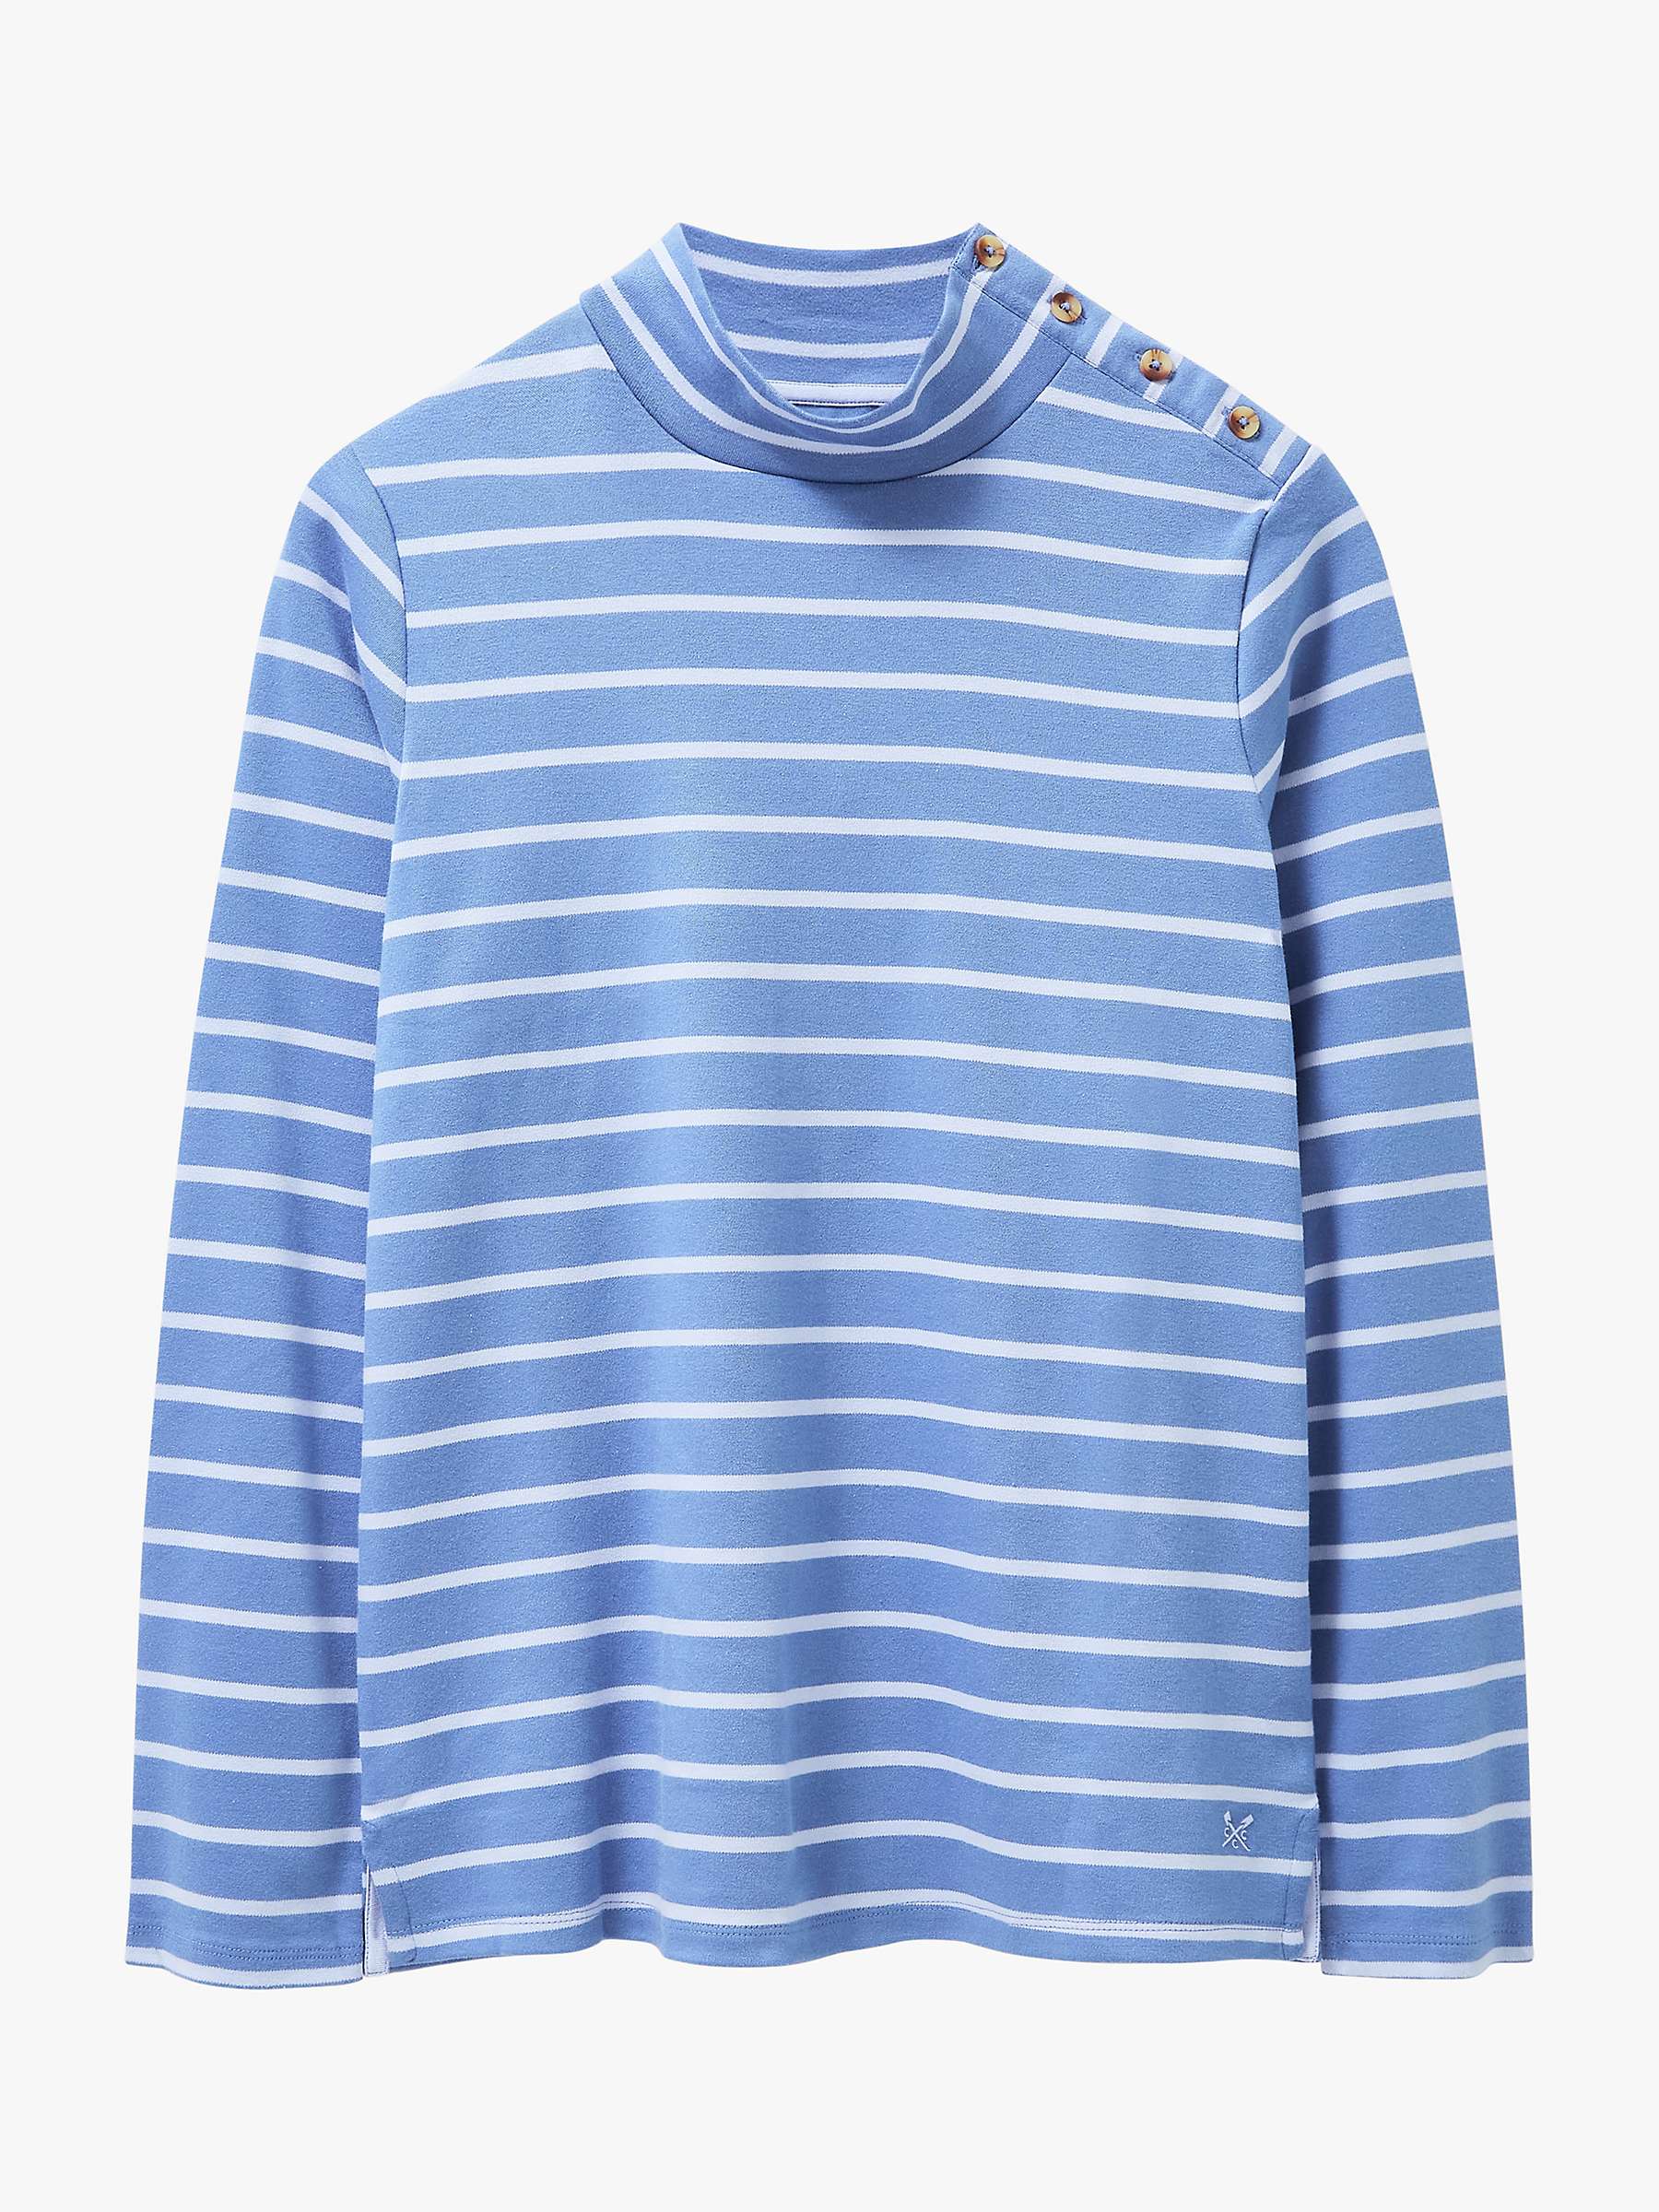 Buy Crew Clothing Relaxed Stripey Button Neck Top, Navy Blue Online at johnlewis.com